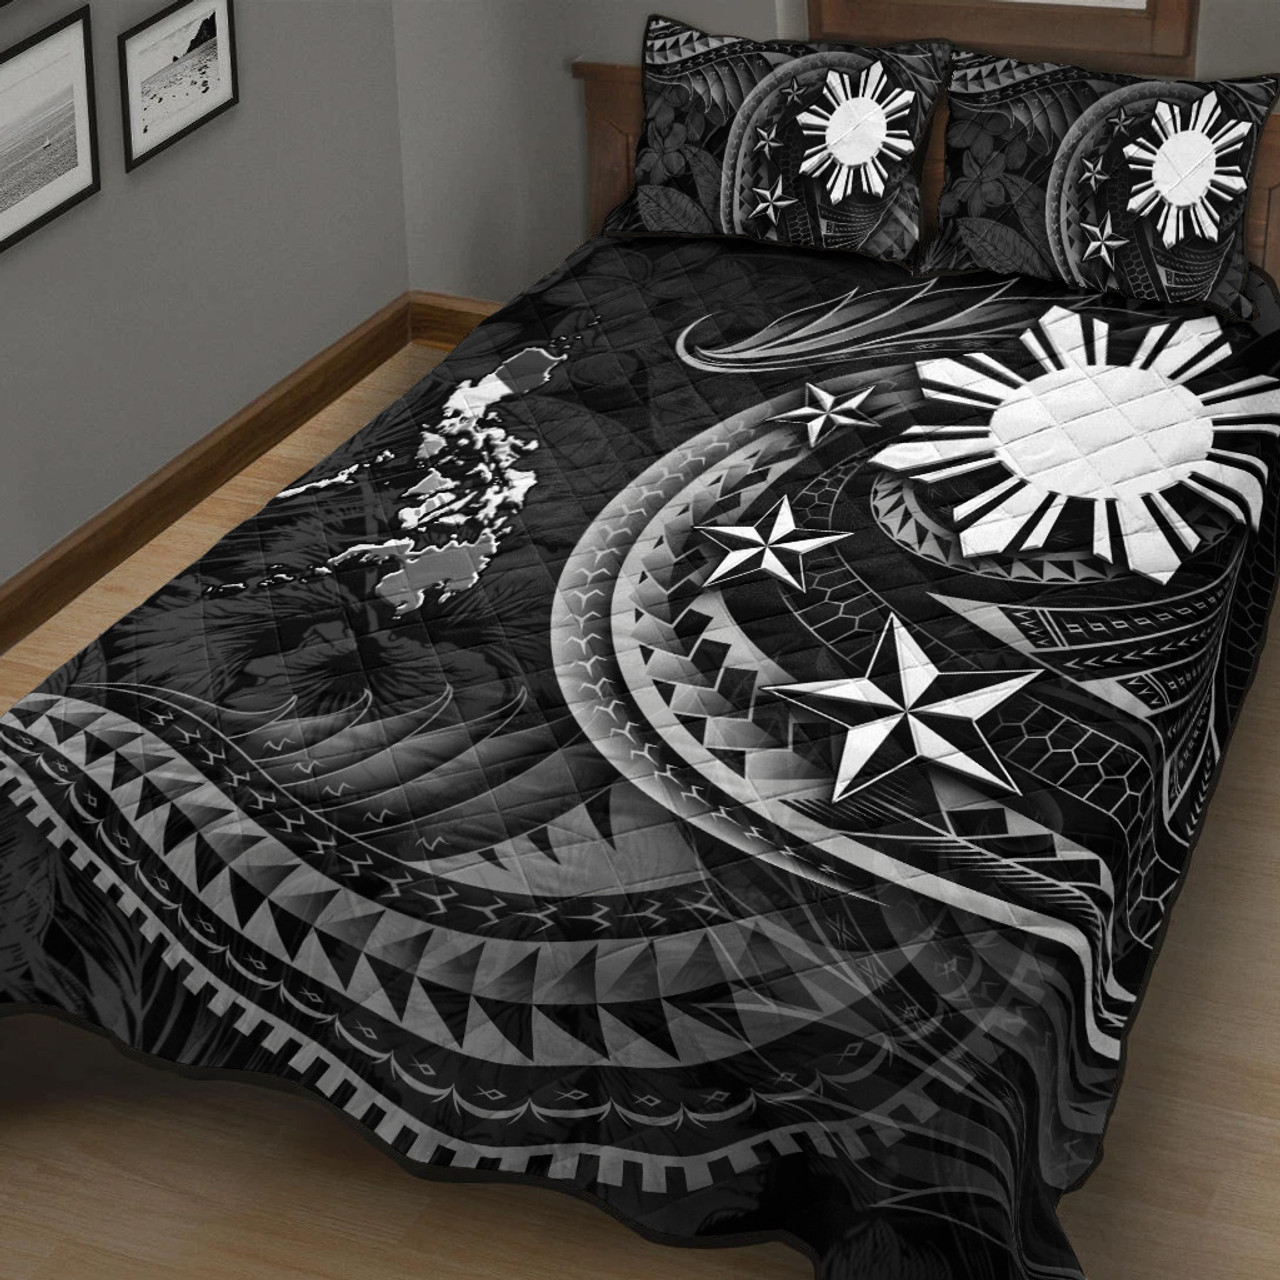 Philippines Filipinos Quilt Bed Set Philippines Sun Tribal Patterns Tropical Flowers Curve Style